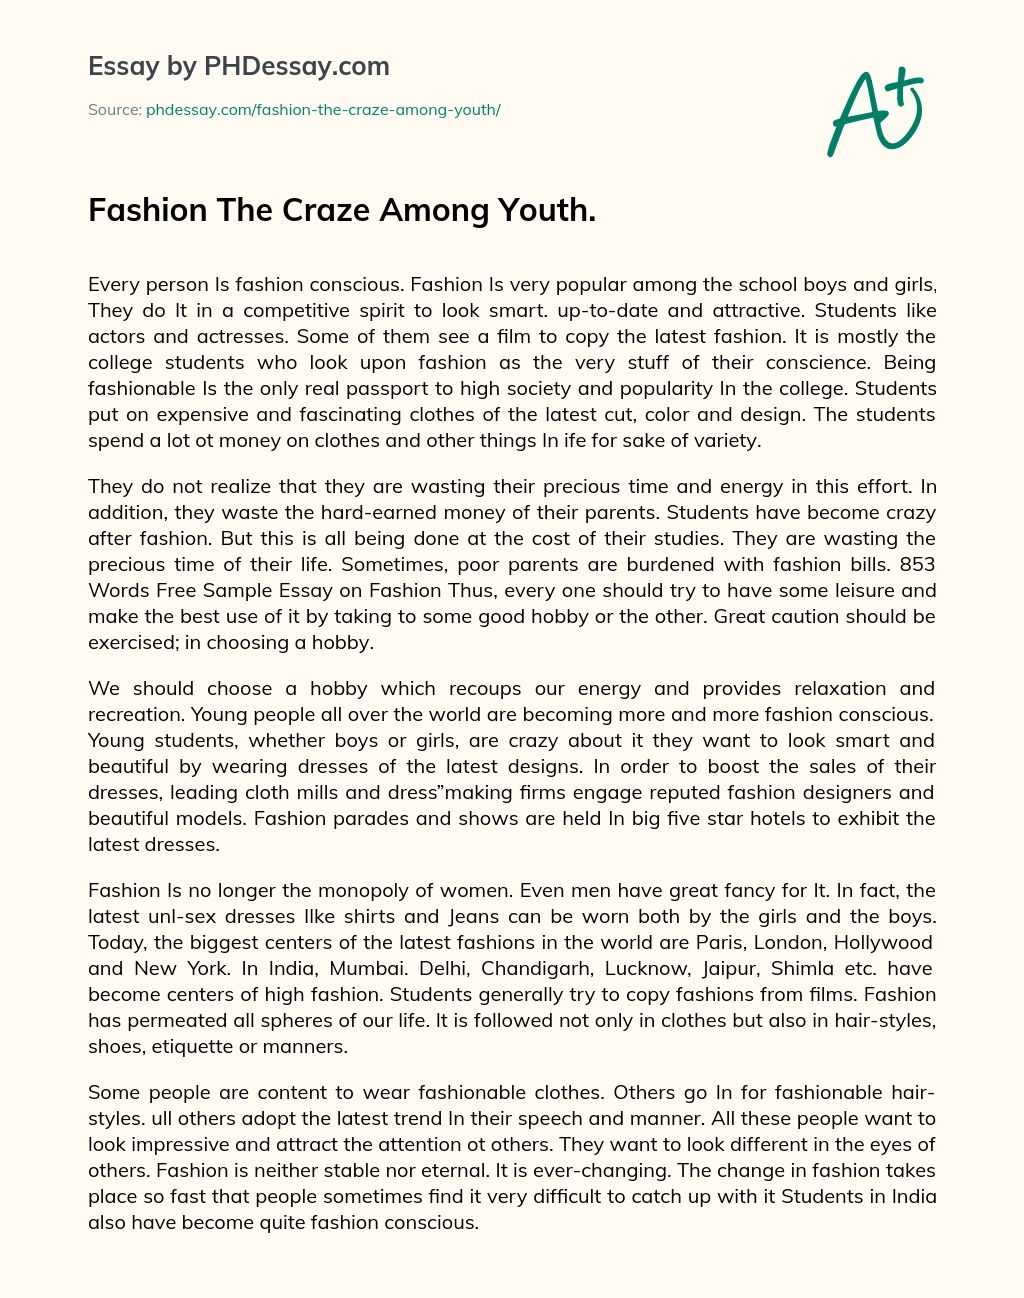 essay on craze of fashion among youngsters